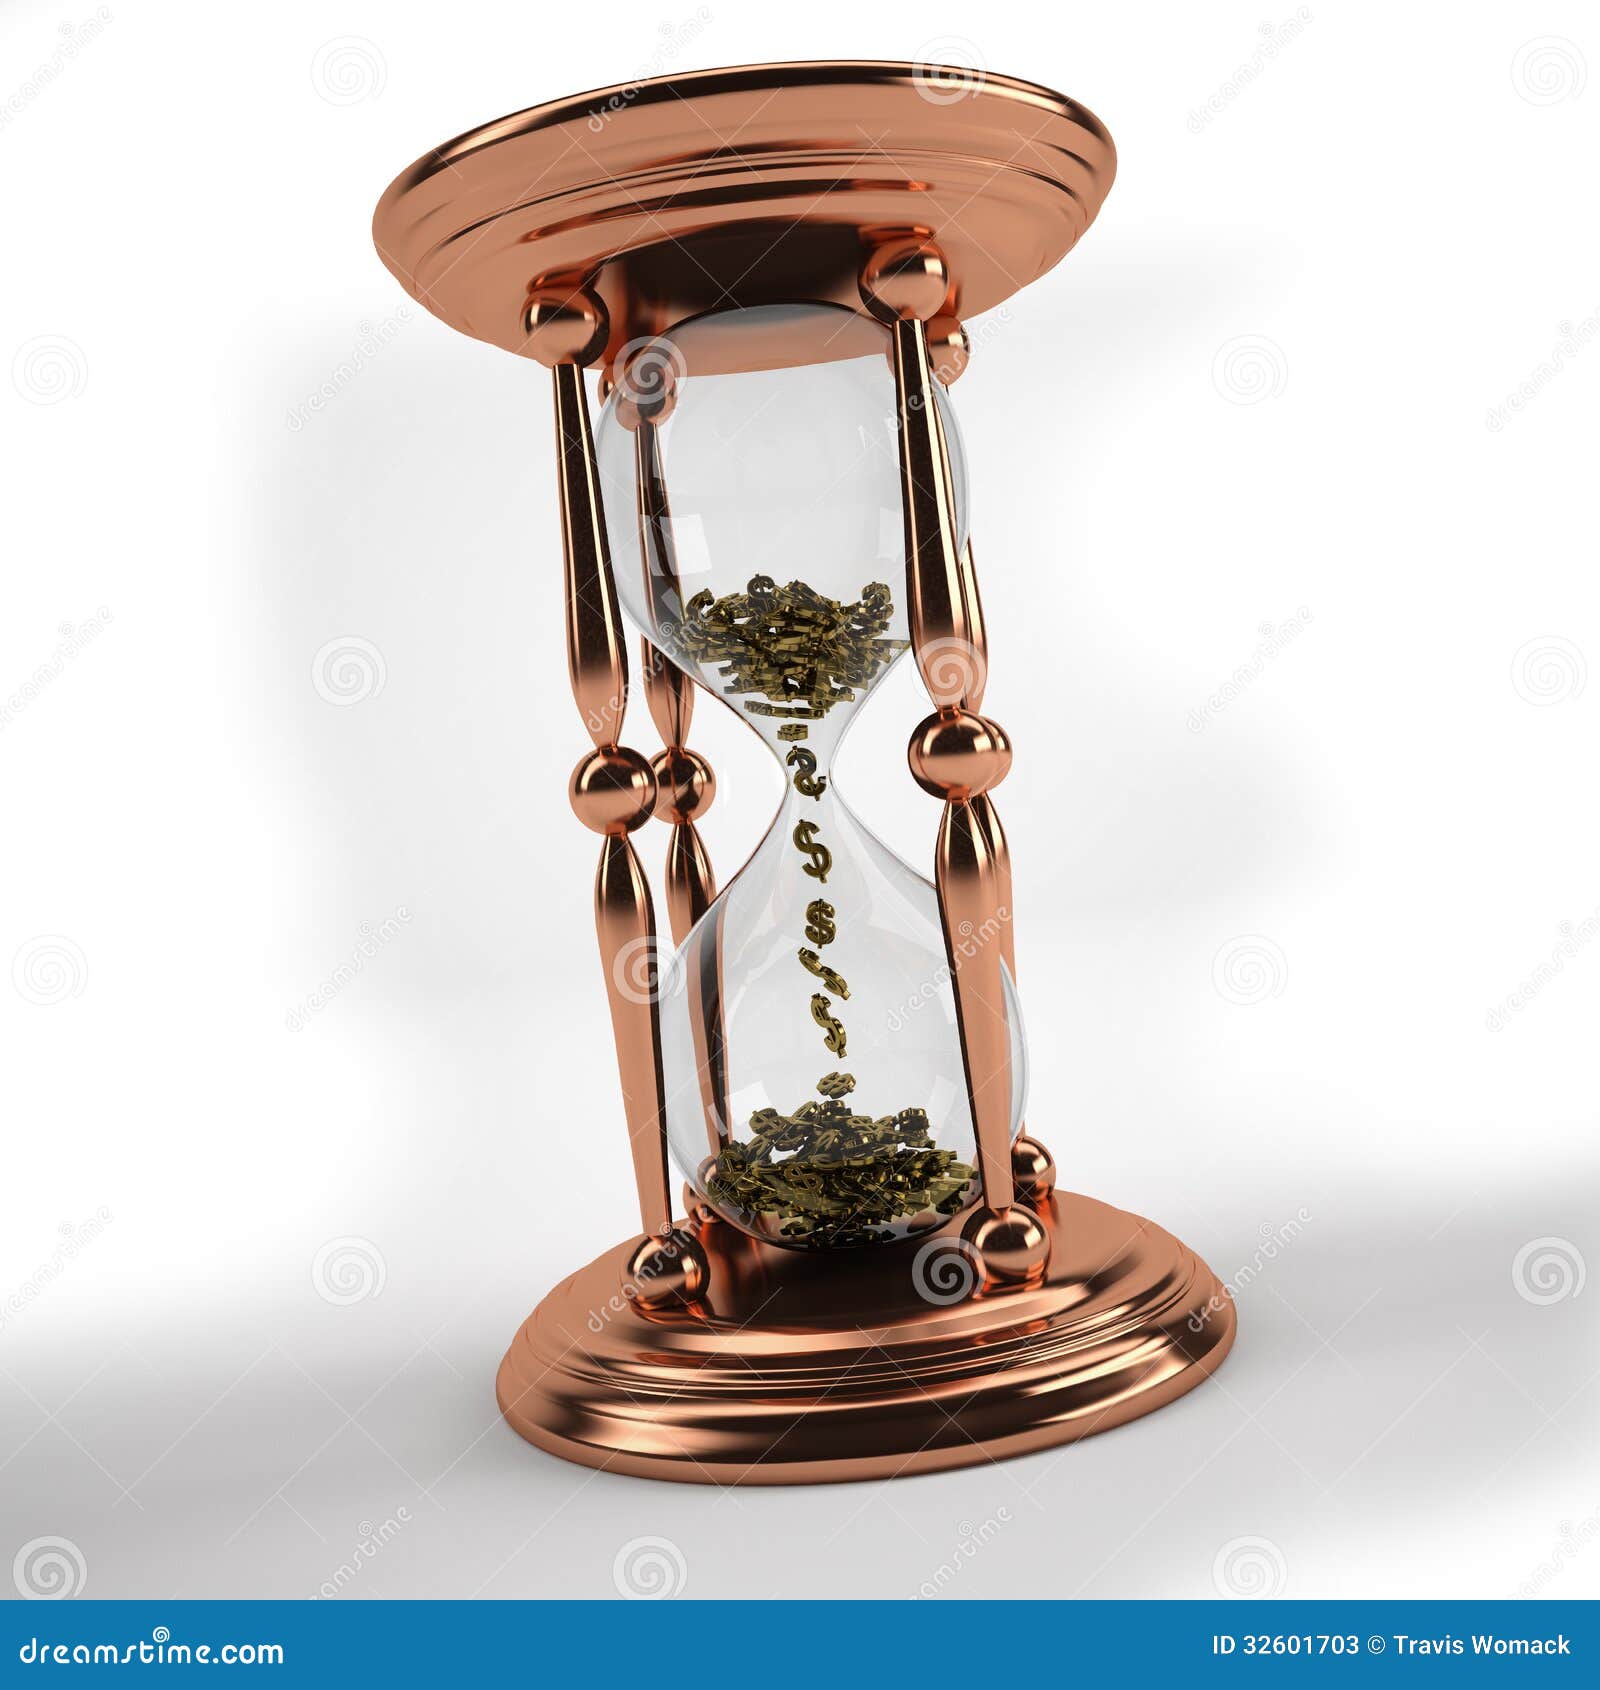 time-money-hourglass-d-rendered-dollar-signs-falling-sand-32601703.jpg